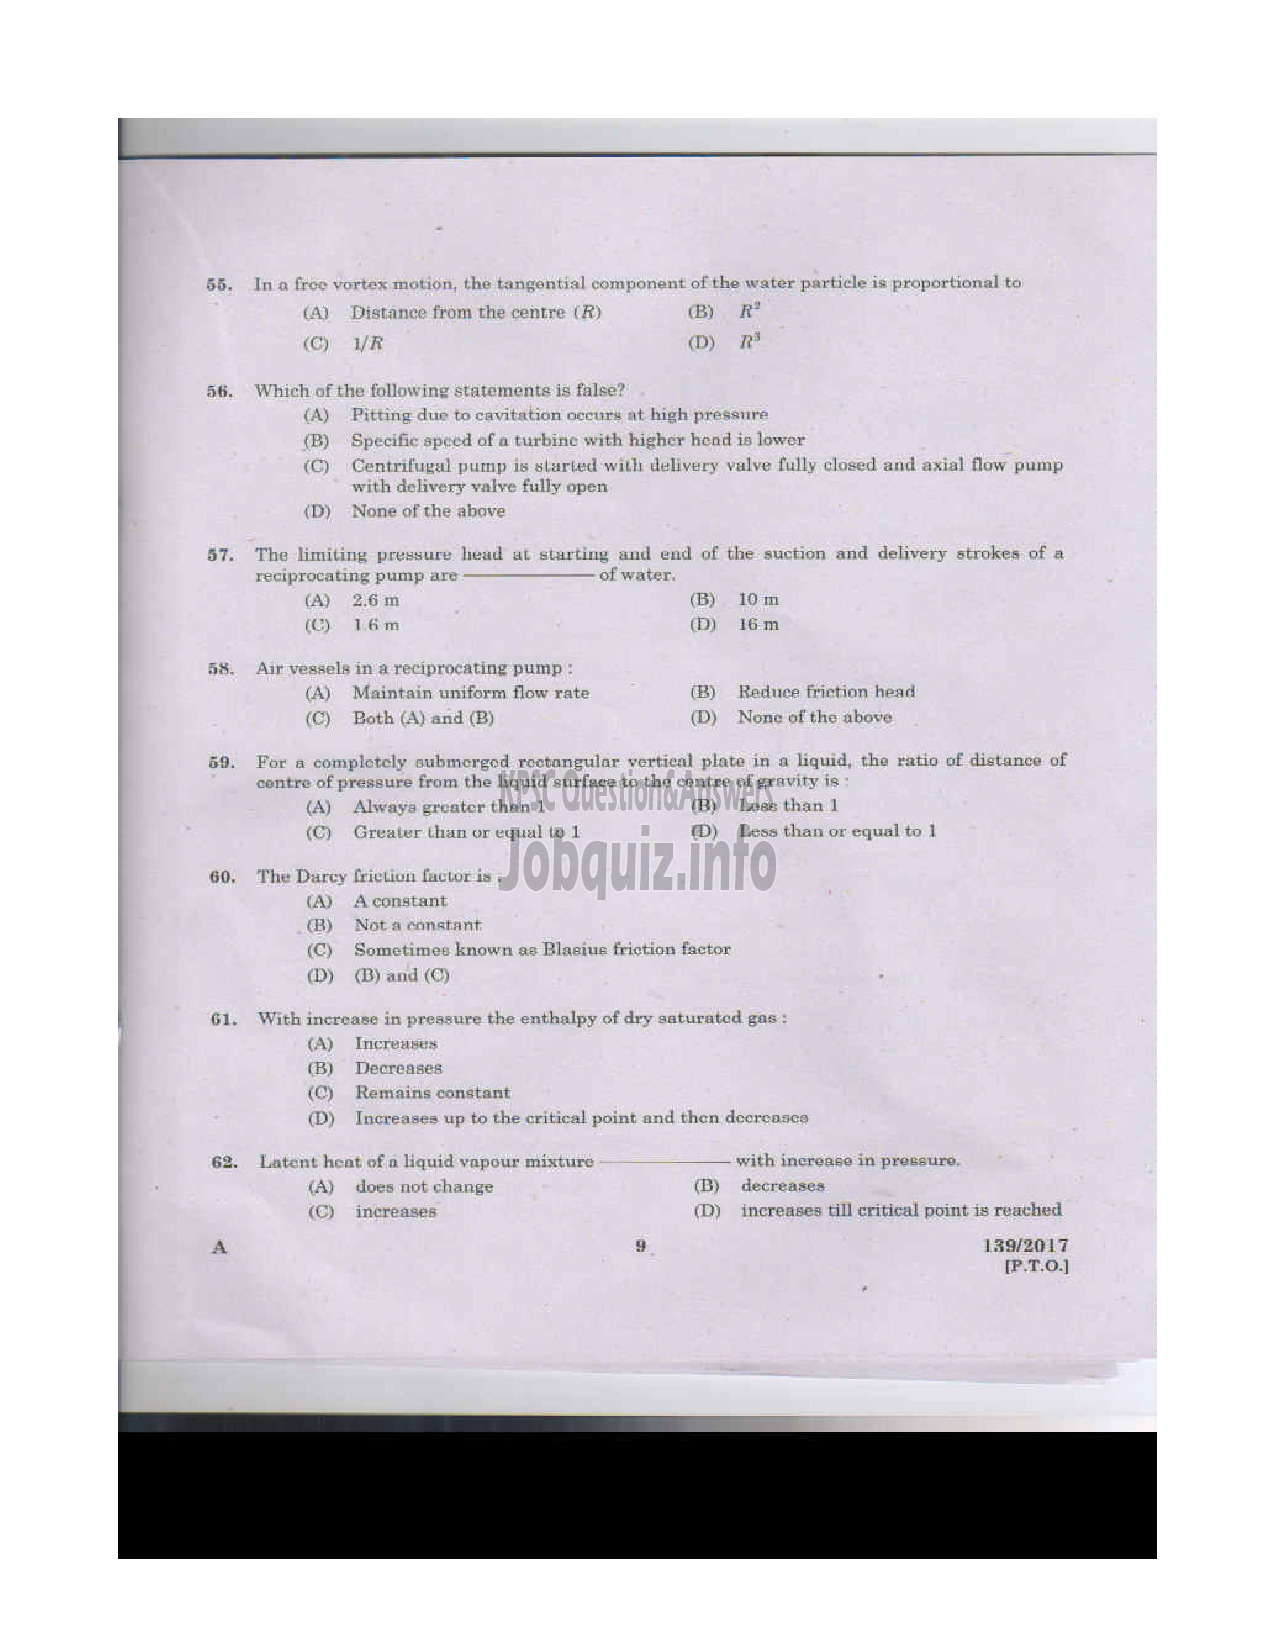 Kerala PSC Question Paper - ASSISTANT ENGINEER GROUND WATER DEPARTMENT-8